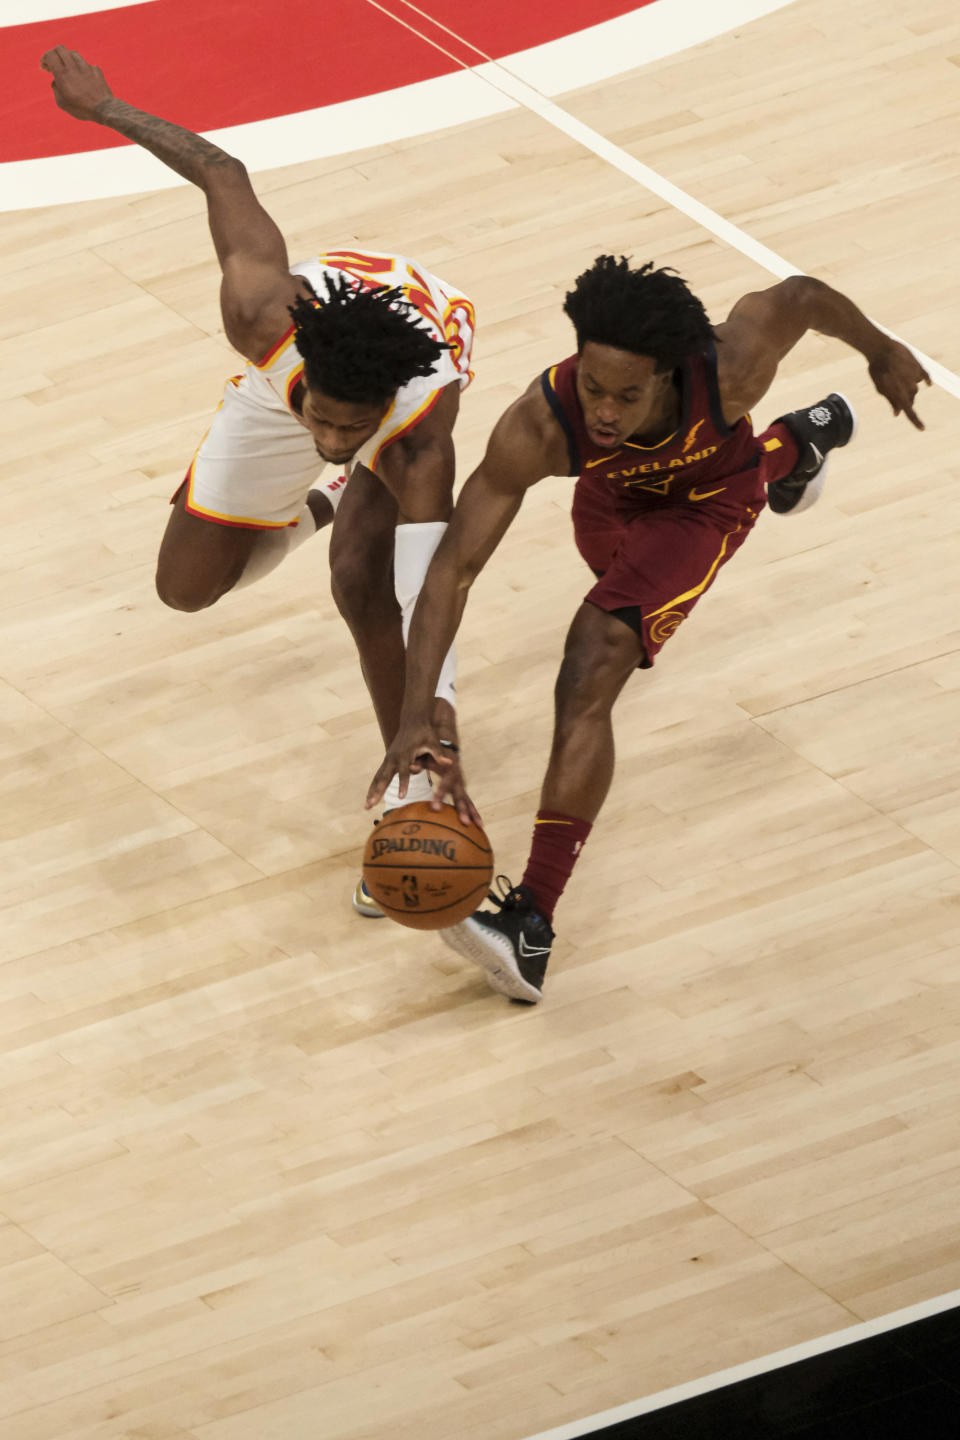 Atlanta Hawks forward Cam Reddish (22) and Cleveland Cavaliers guard Collin Sexton (2) dive for the ball during the first half of an NBA basketball game on Saturday, Jan. 2, 2021, in Atlanta. (AP Photo/Ben Gray)